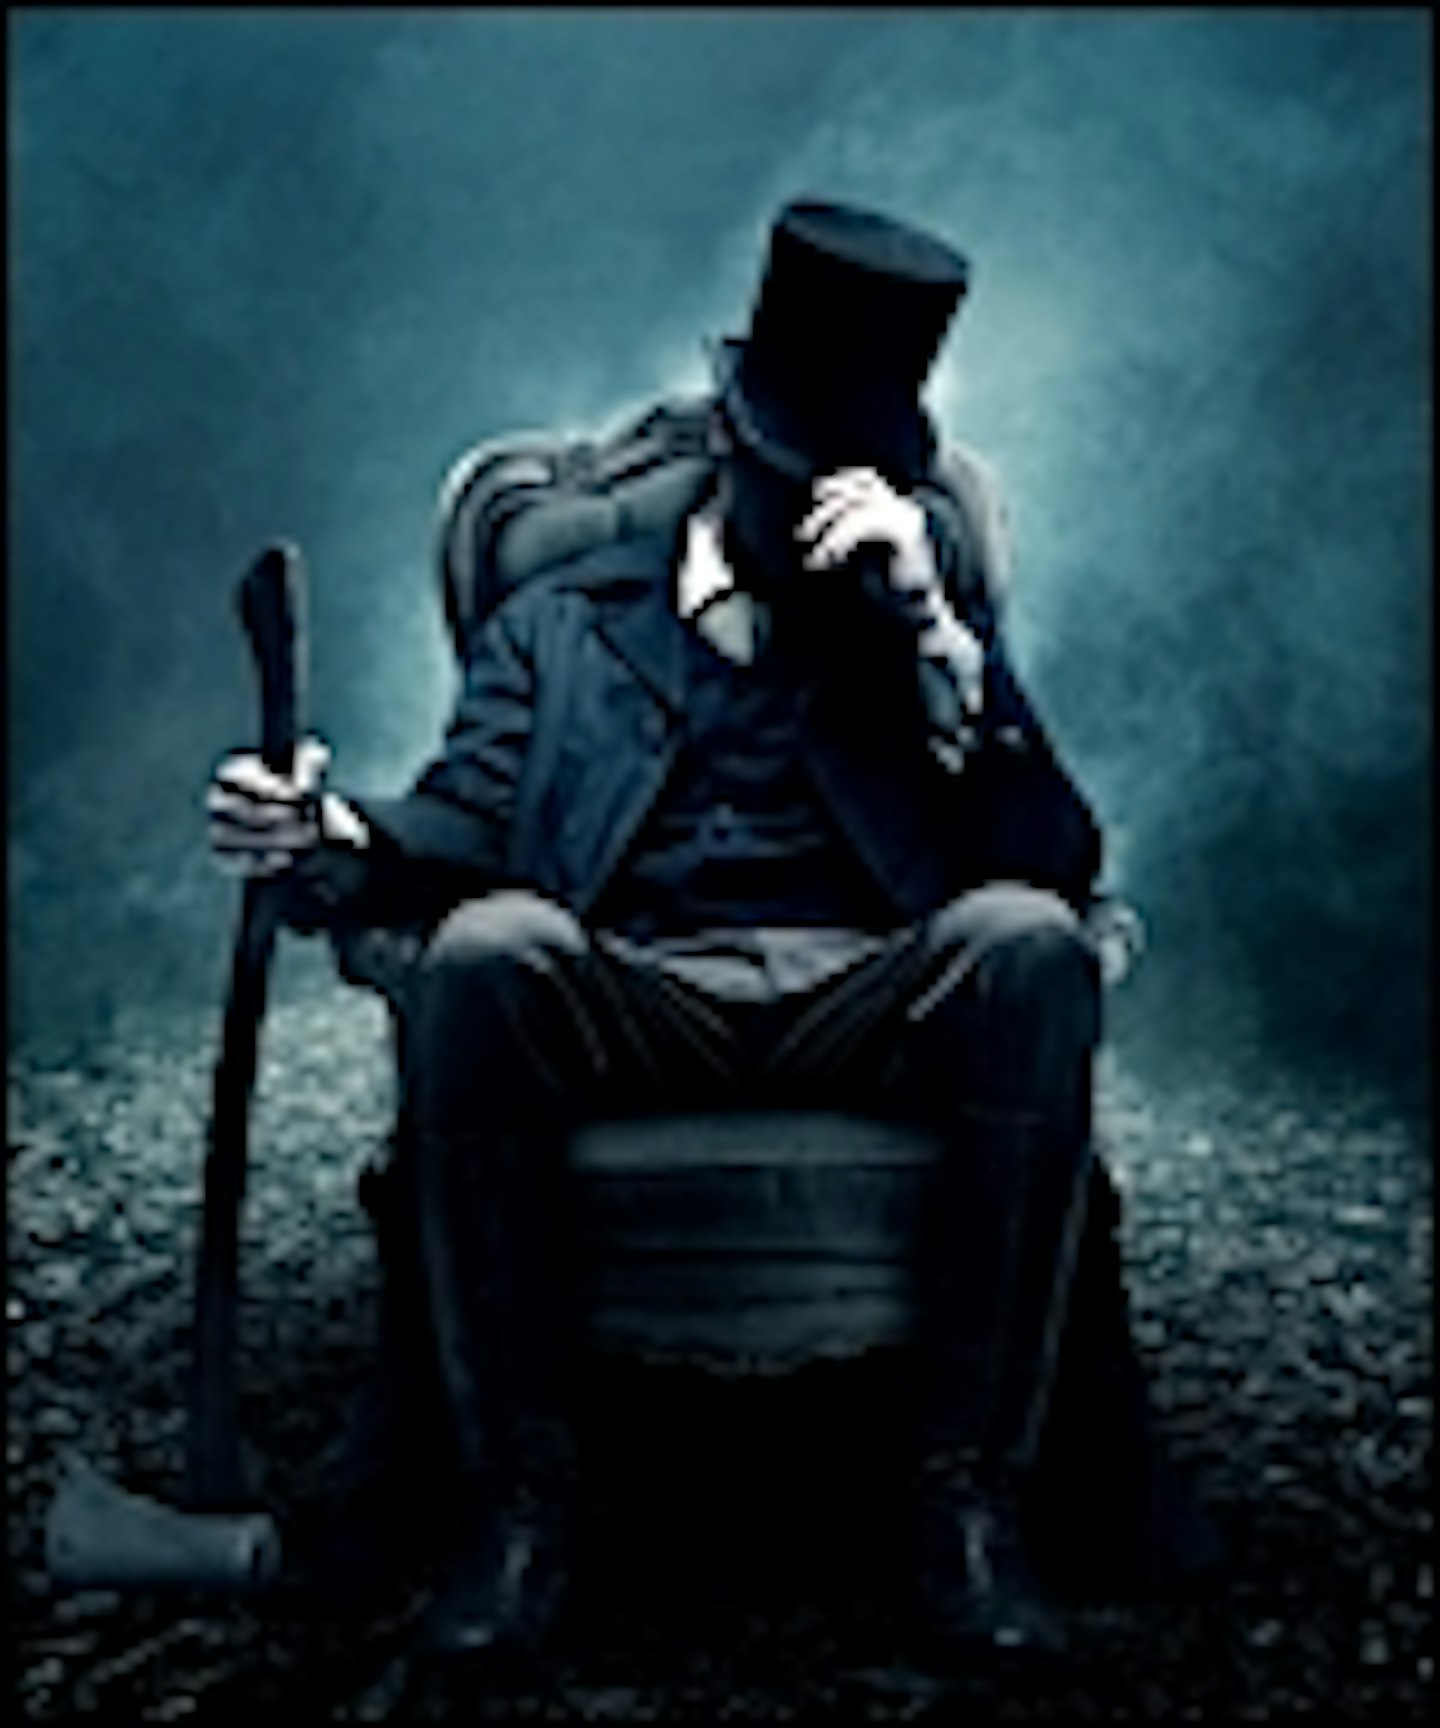 Abe Lincoln: Vampire Hunter Posters